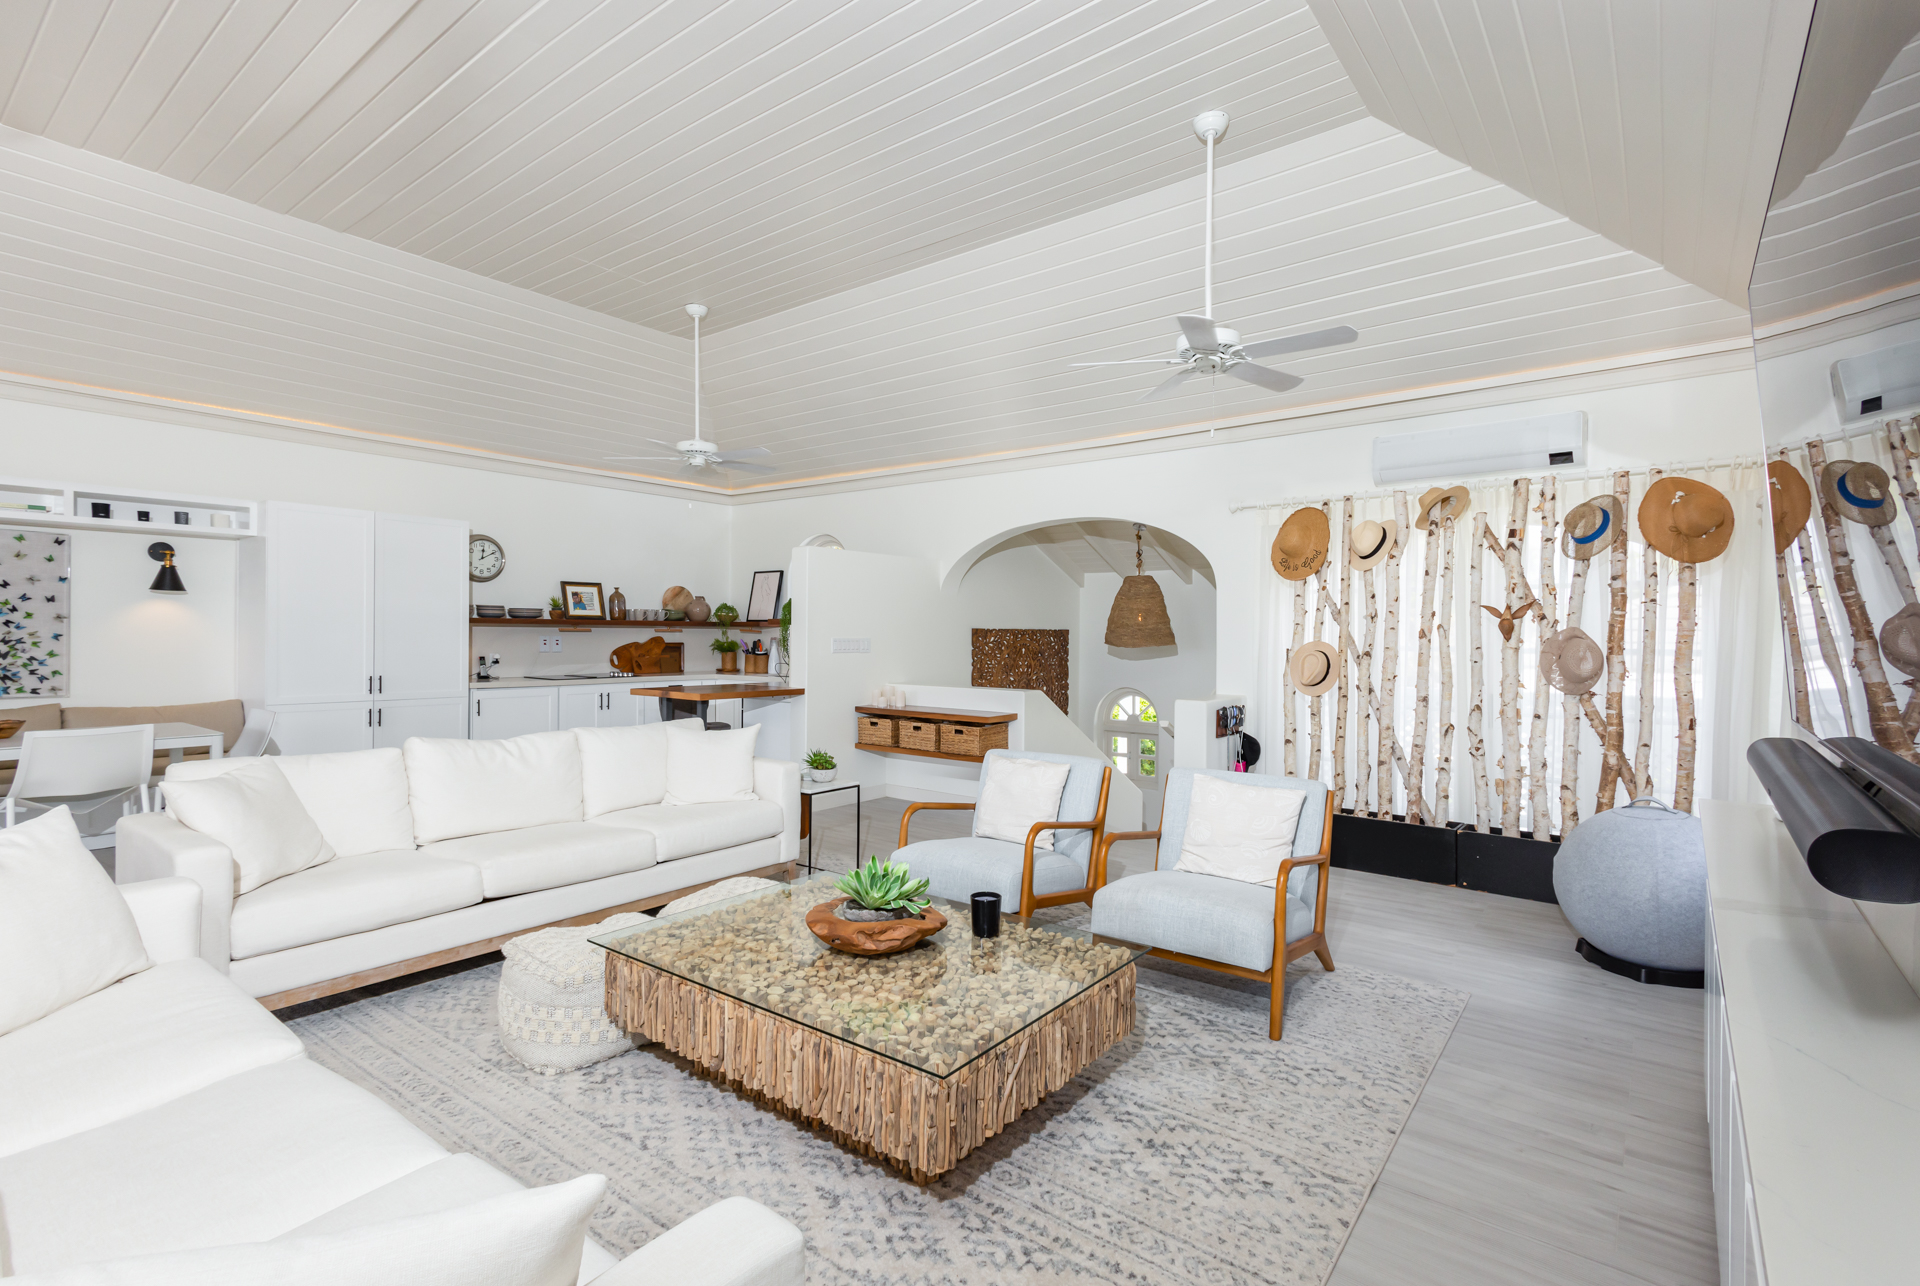 View properties in Barbados like Zion House, Royal Westmoreland, Forest Hills 2 - the beautiful, light filled living room pictured here is worth the visit.